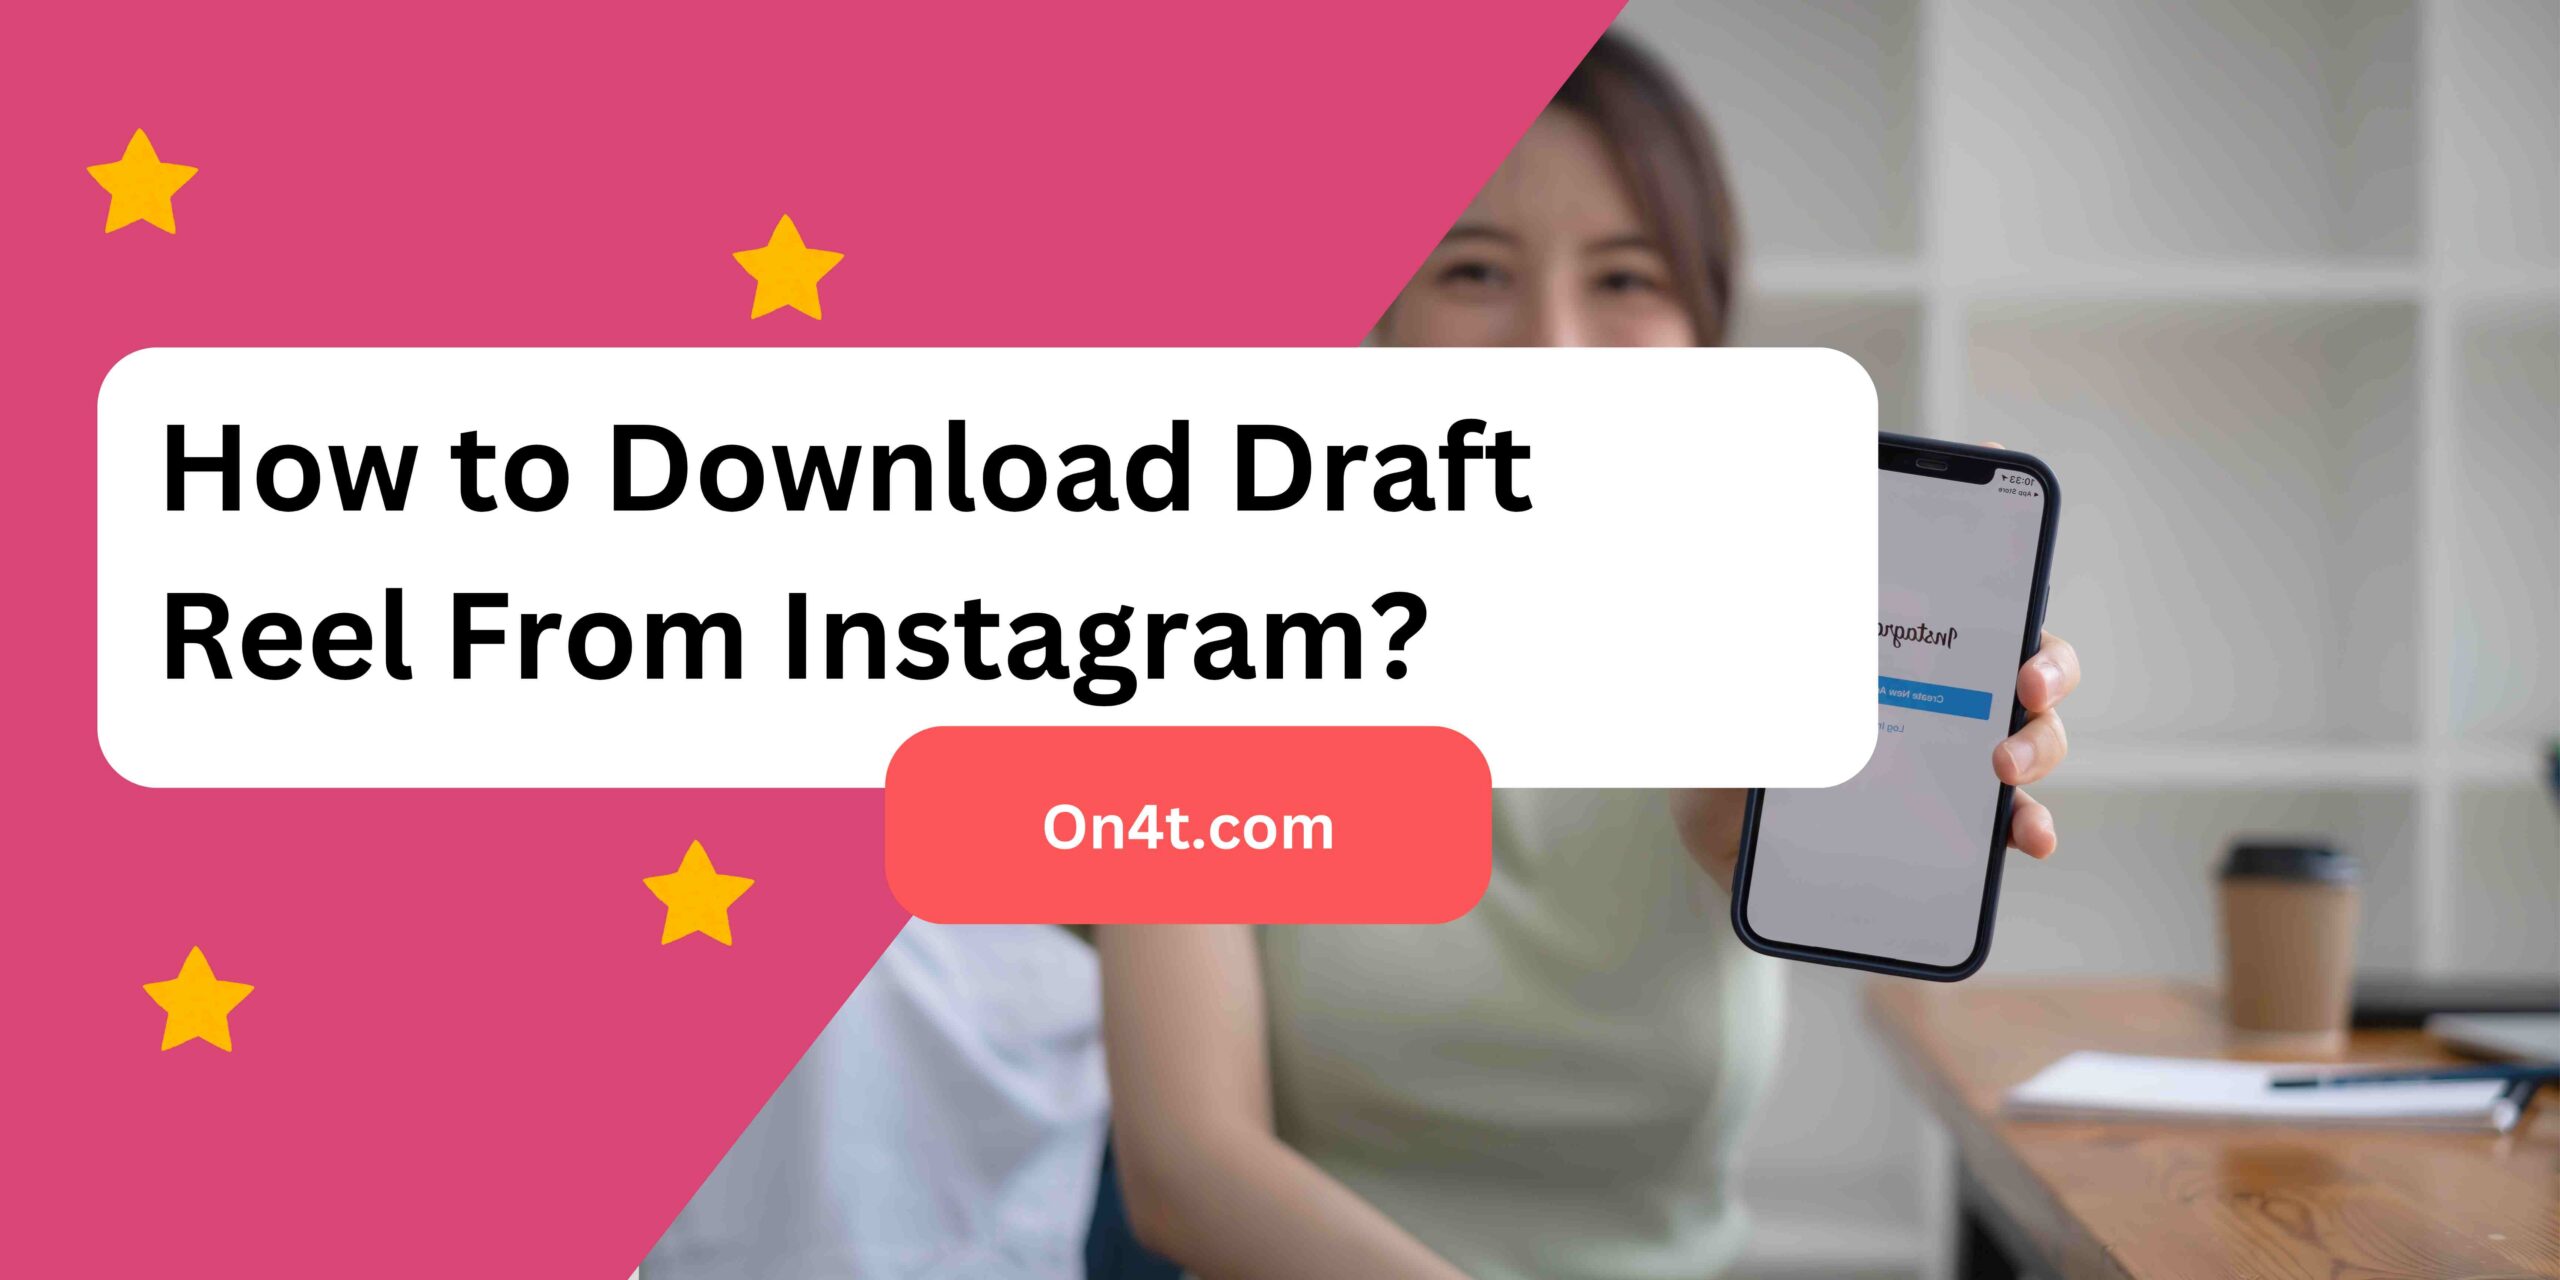 How to Download Draft Reel From Instagram